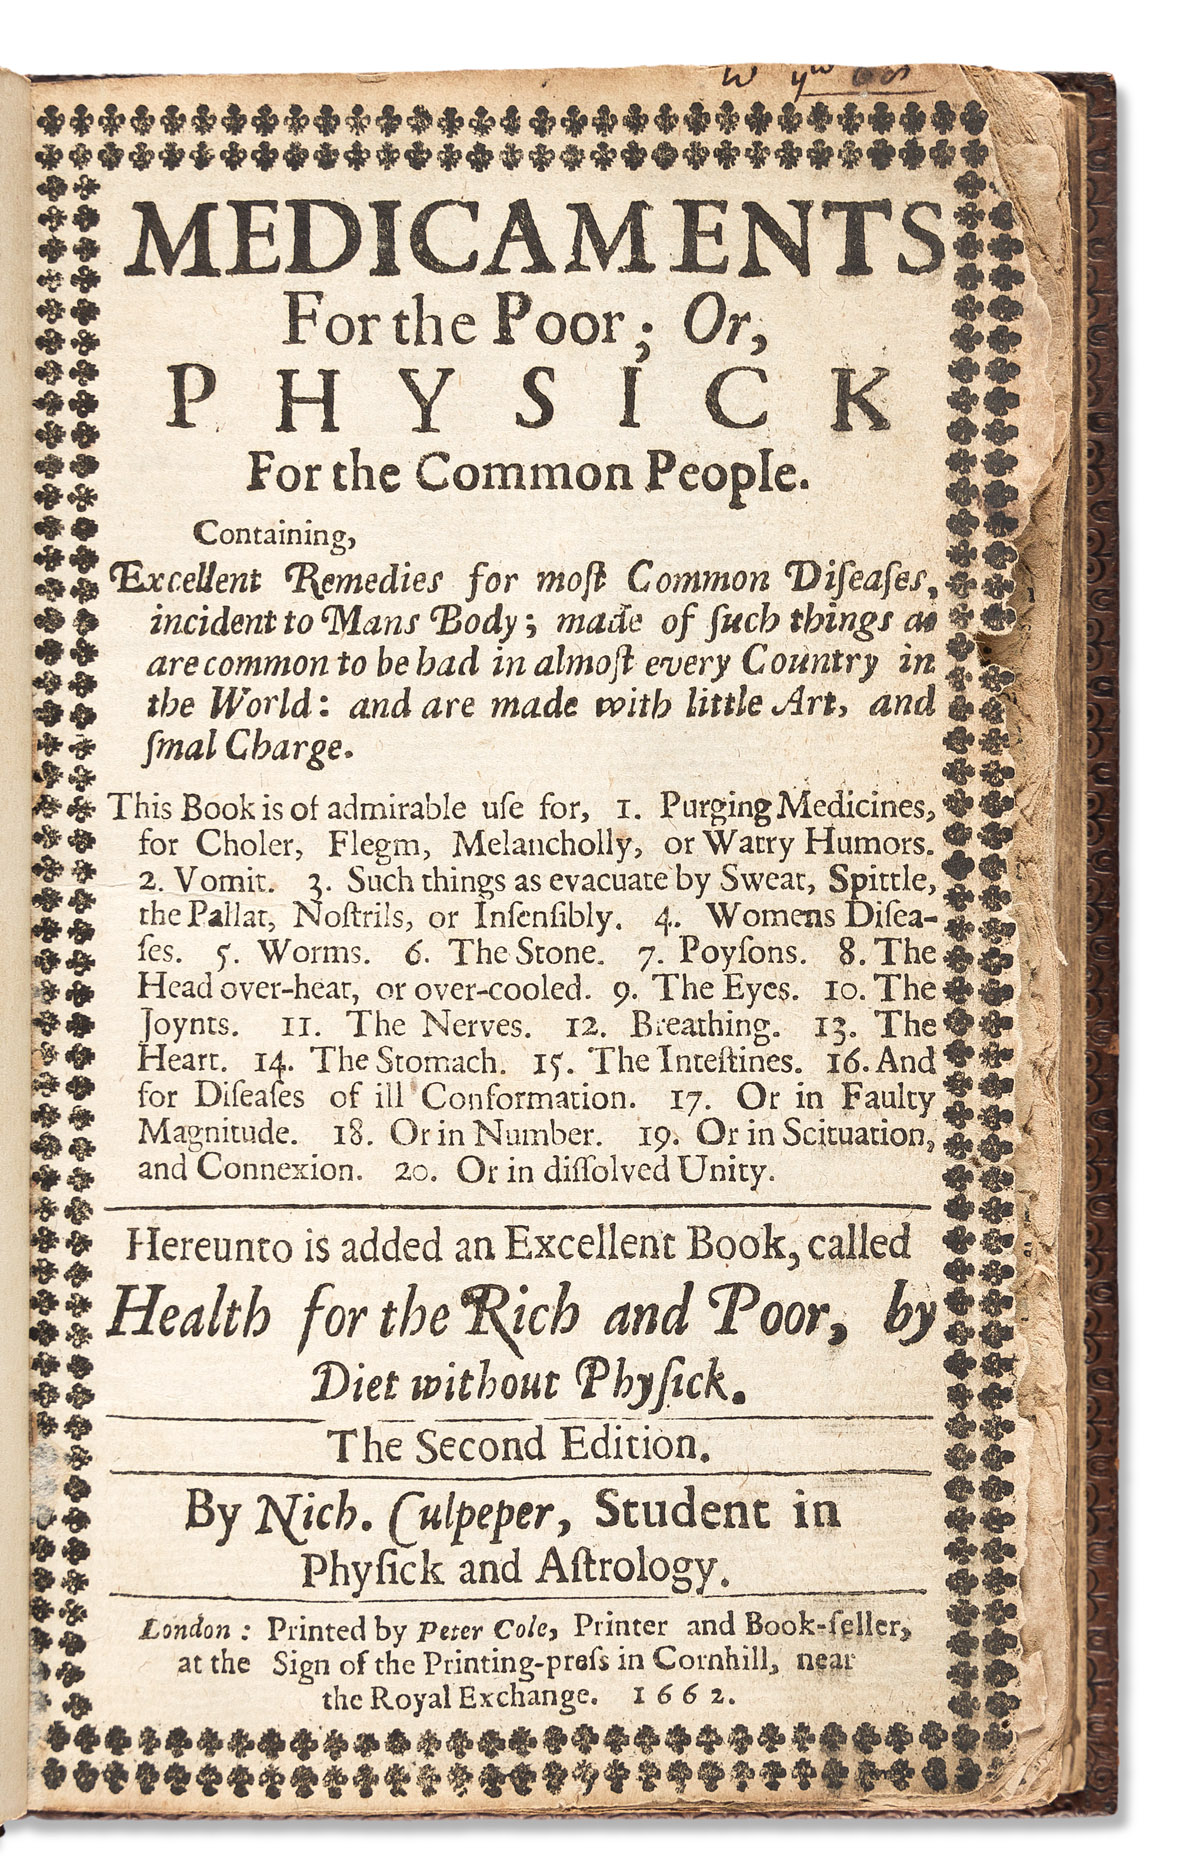 Prevost, Jean (1585-1631) trans. Nicholas Culpepper. Medicaments for the Poor; or, Physick for the Common People.